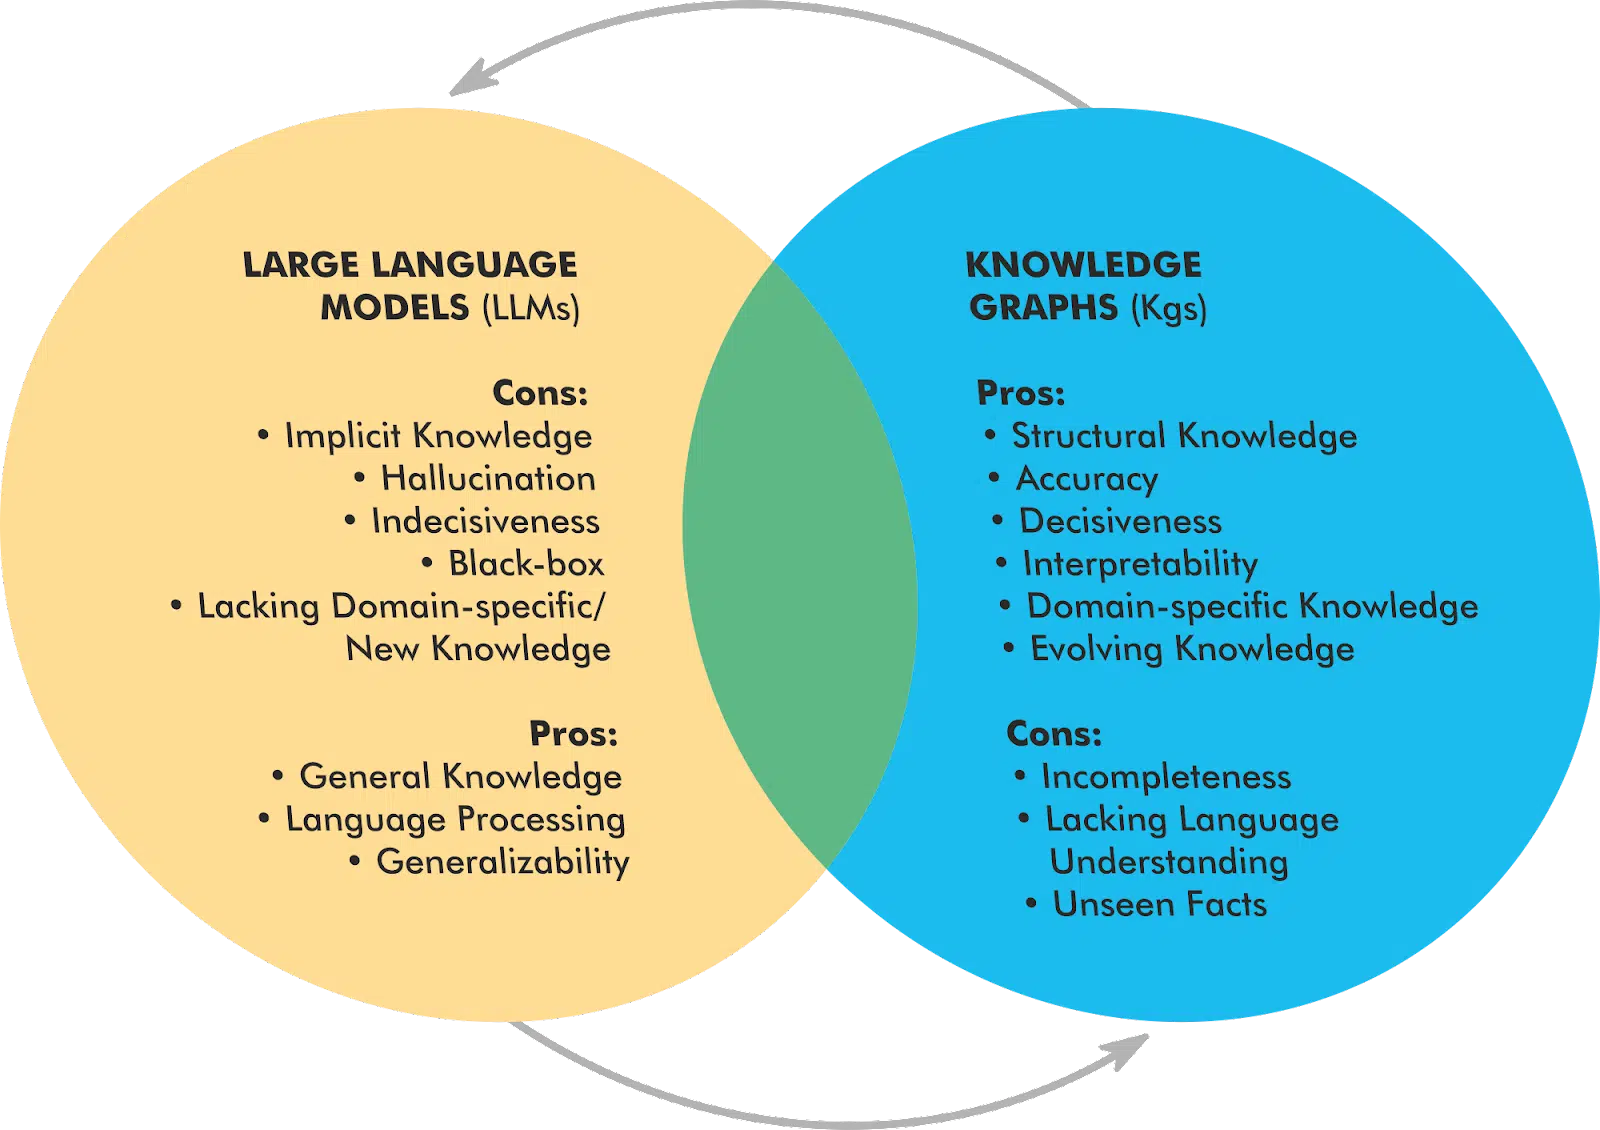 LLMs and Knowledge Graphs